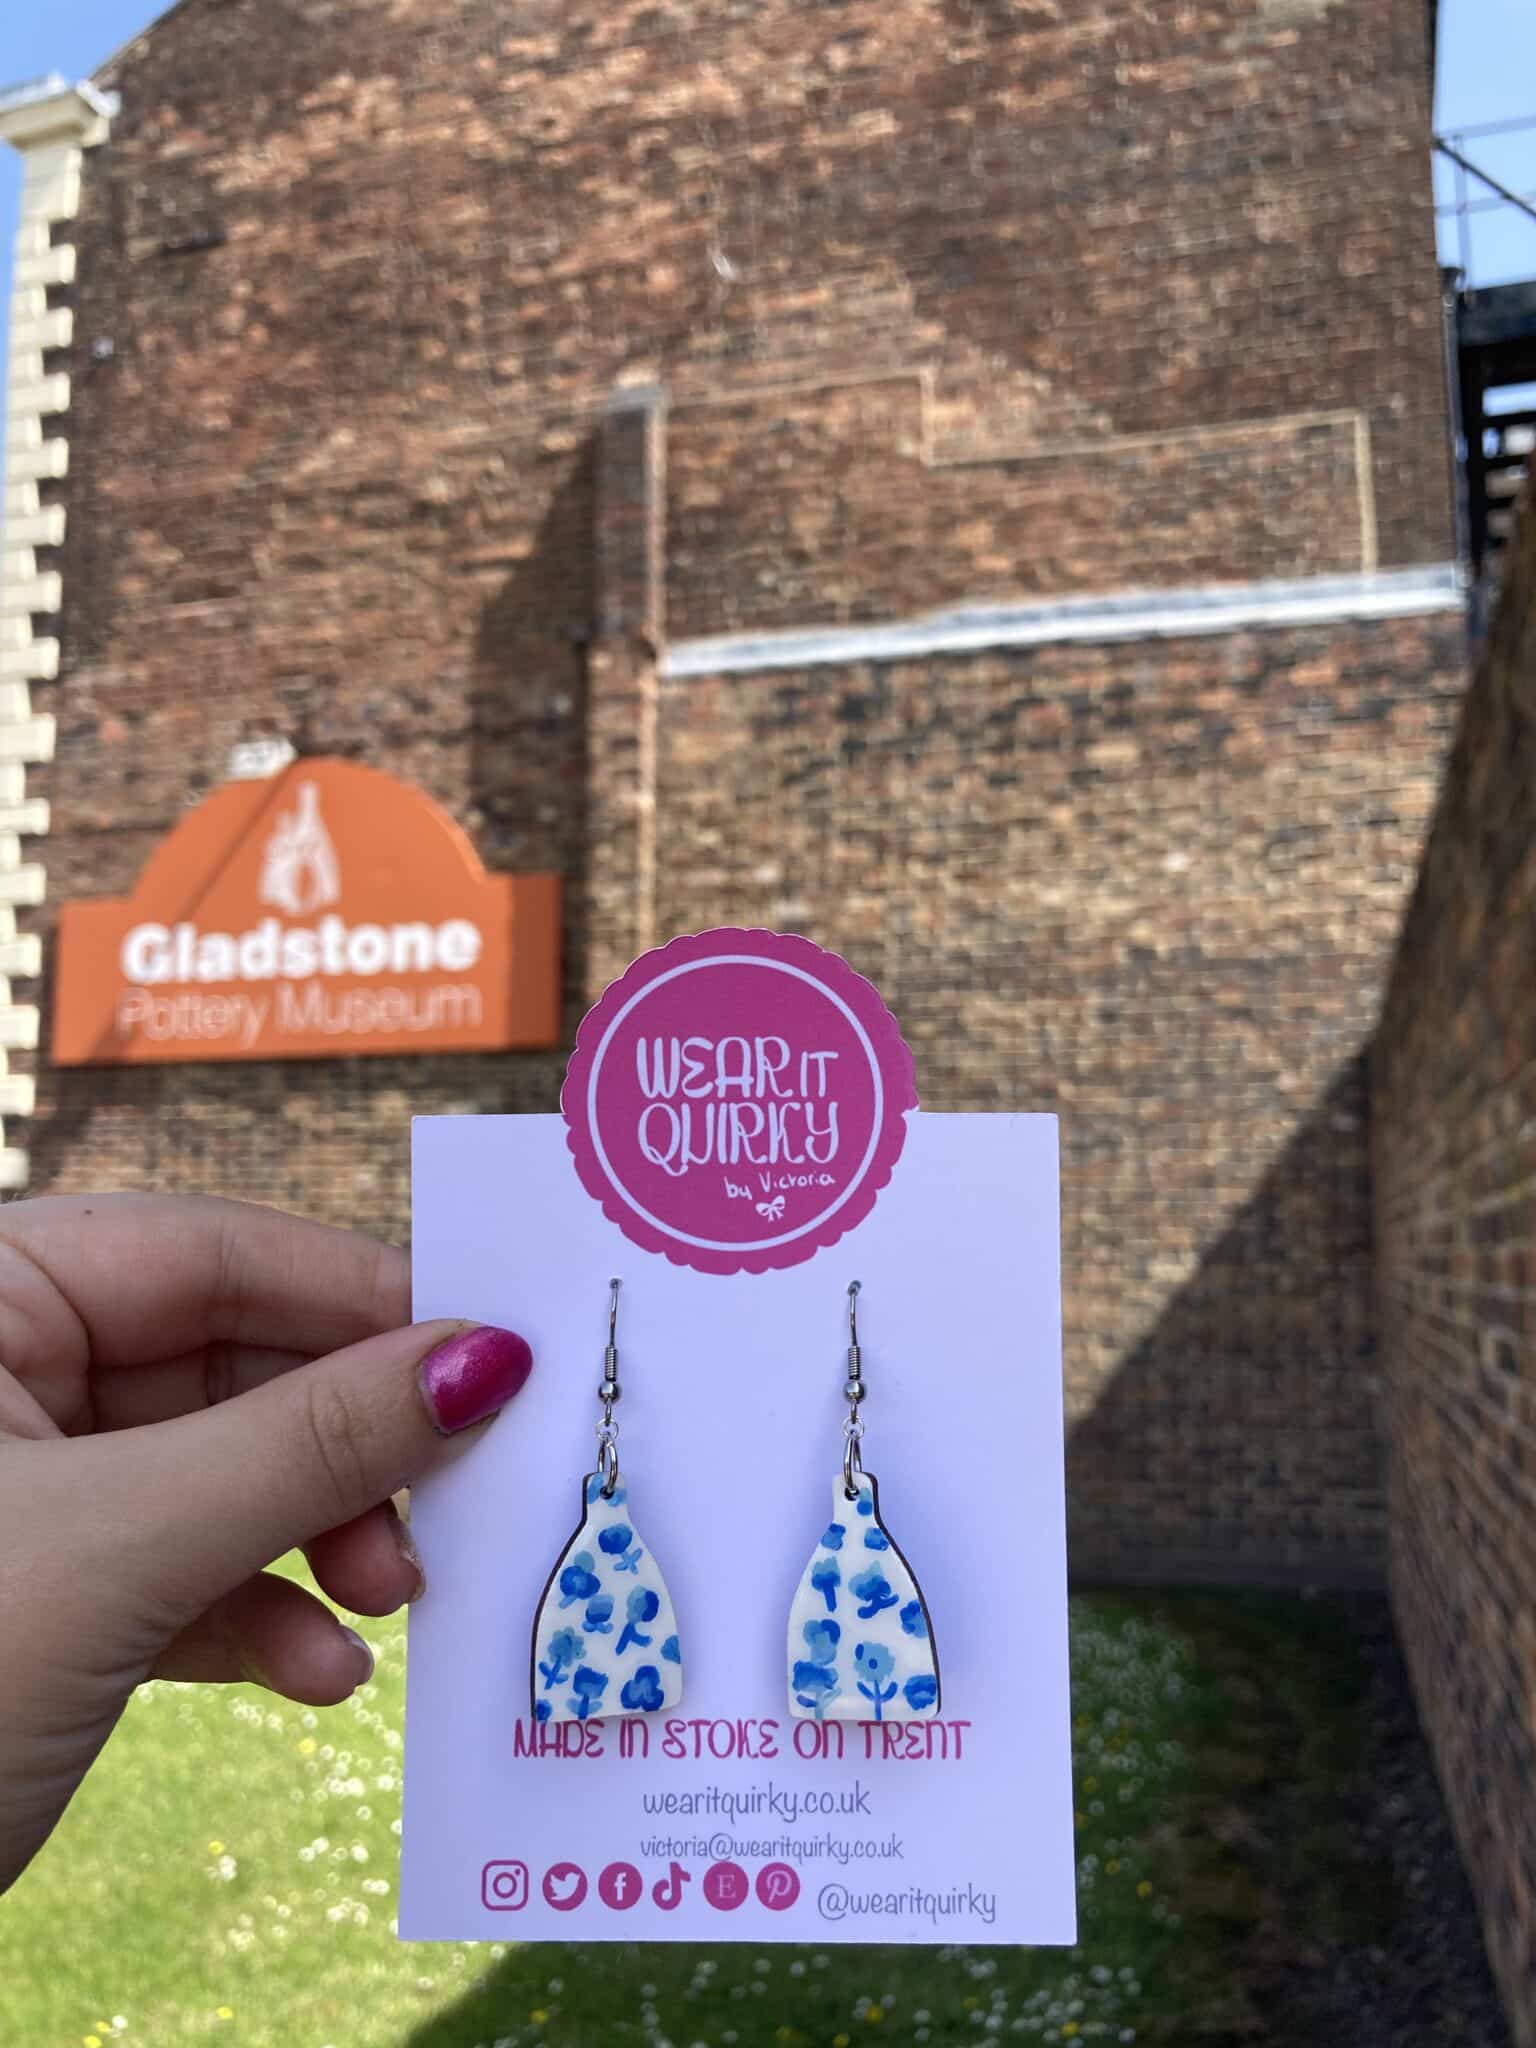 Gladstone Pottery Museum as Stockist for Wear It Quirky